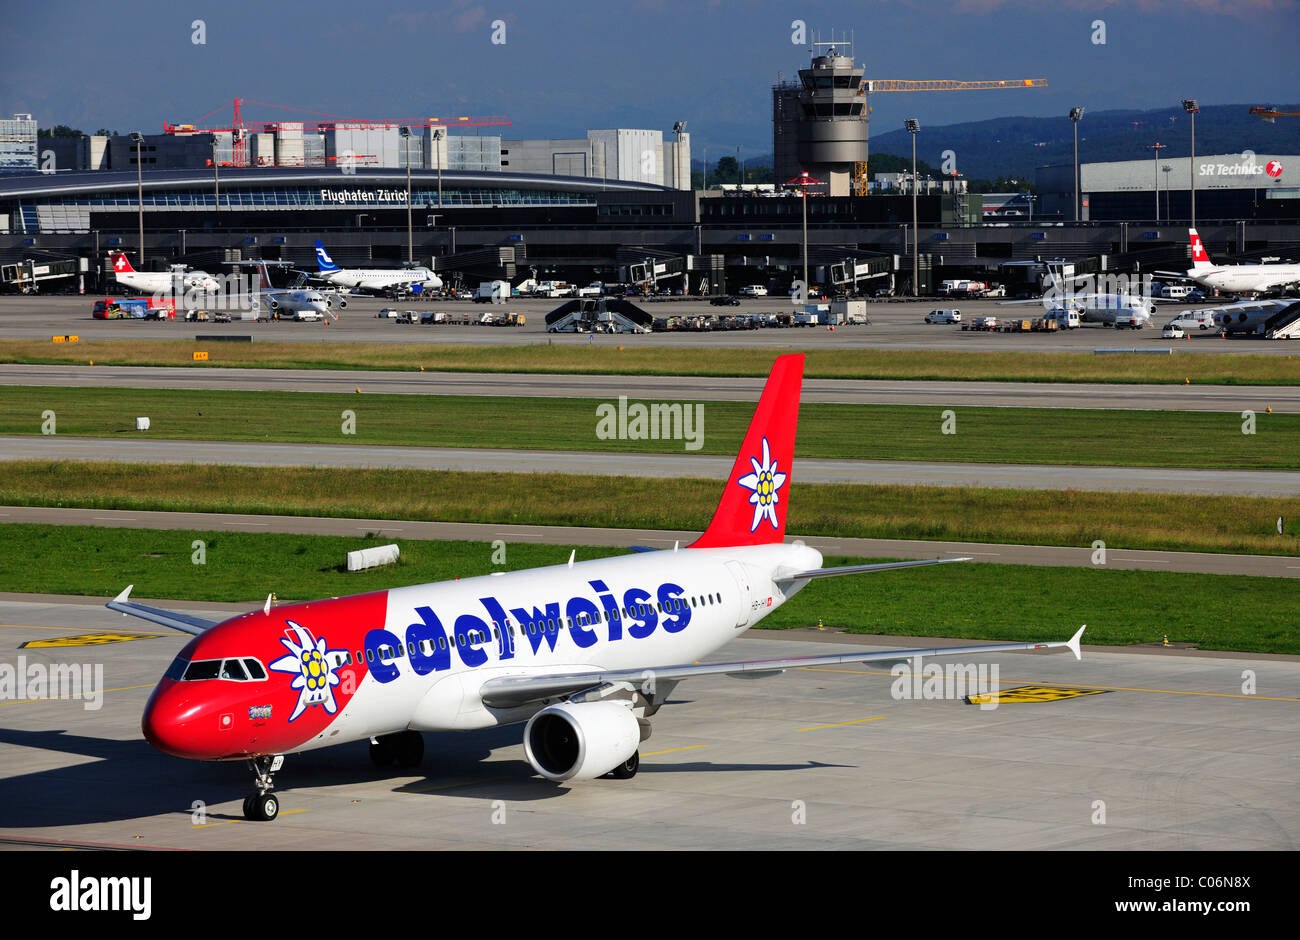 Airbus 320 from Edelweiss Air at Zurich Airport, Switzerland, Europe Stock Photo